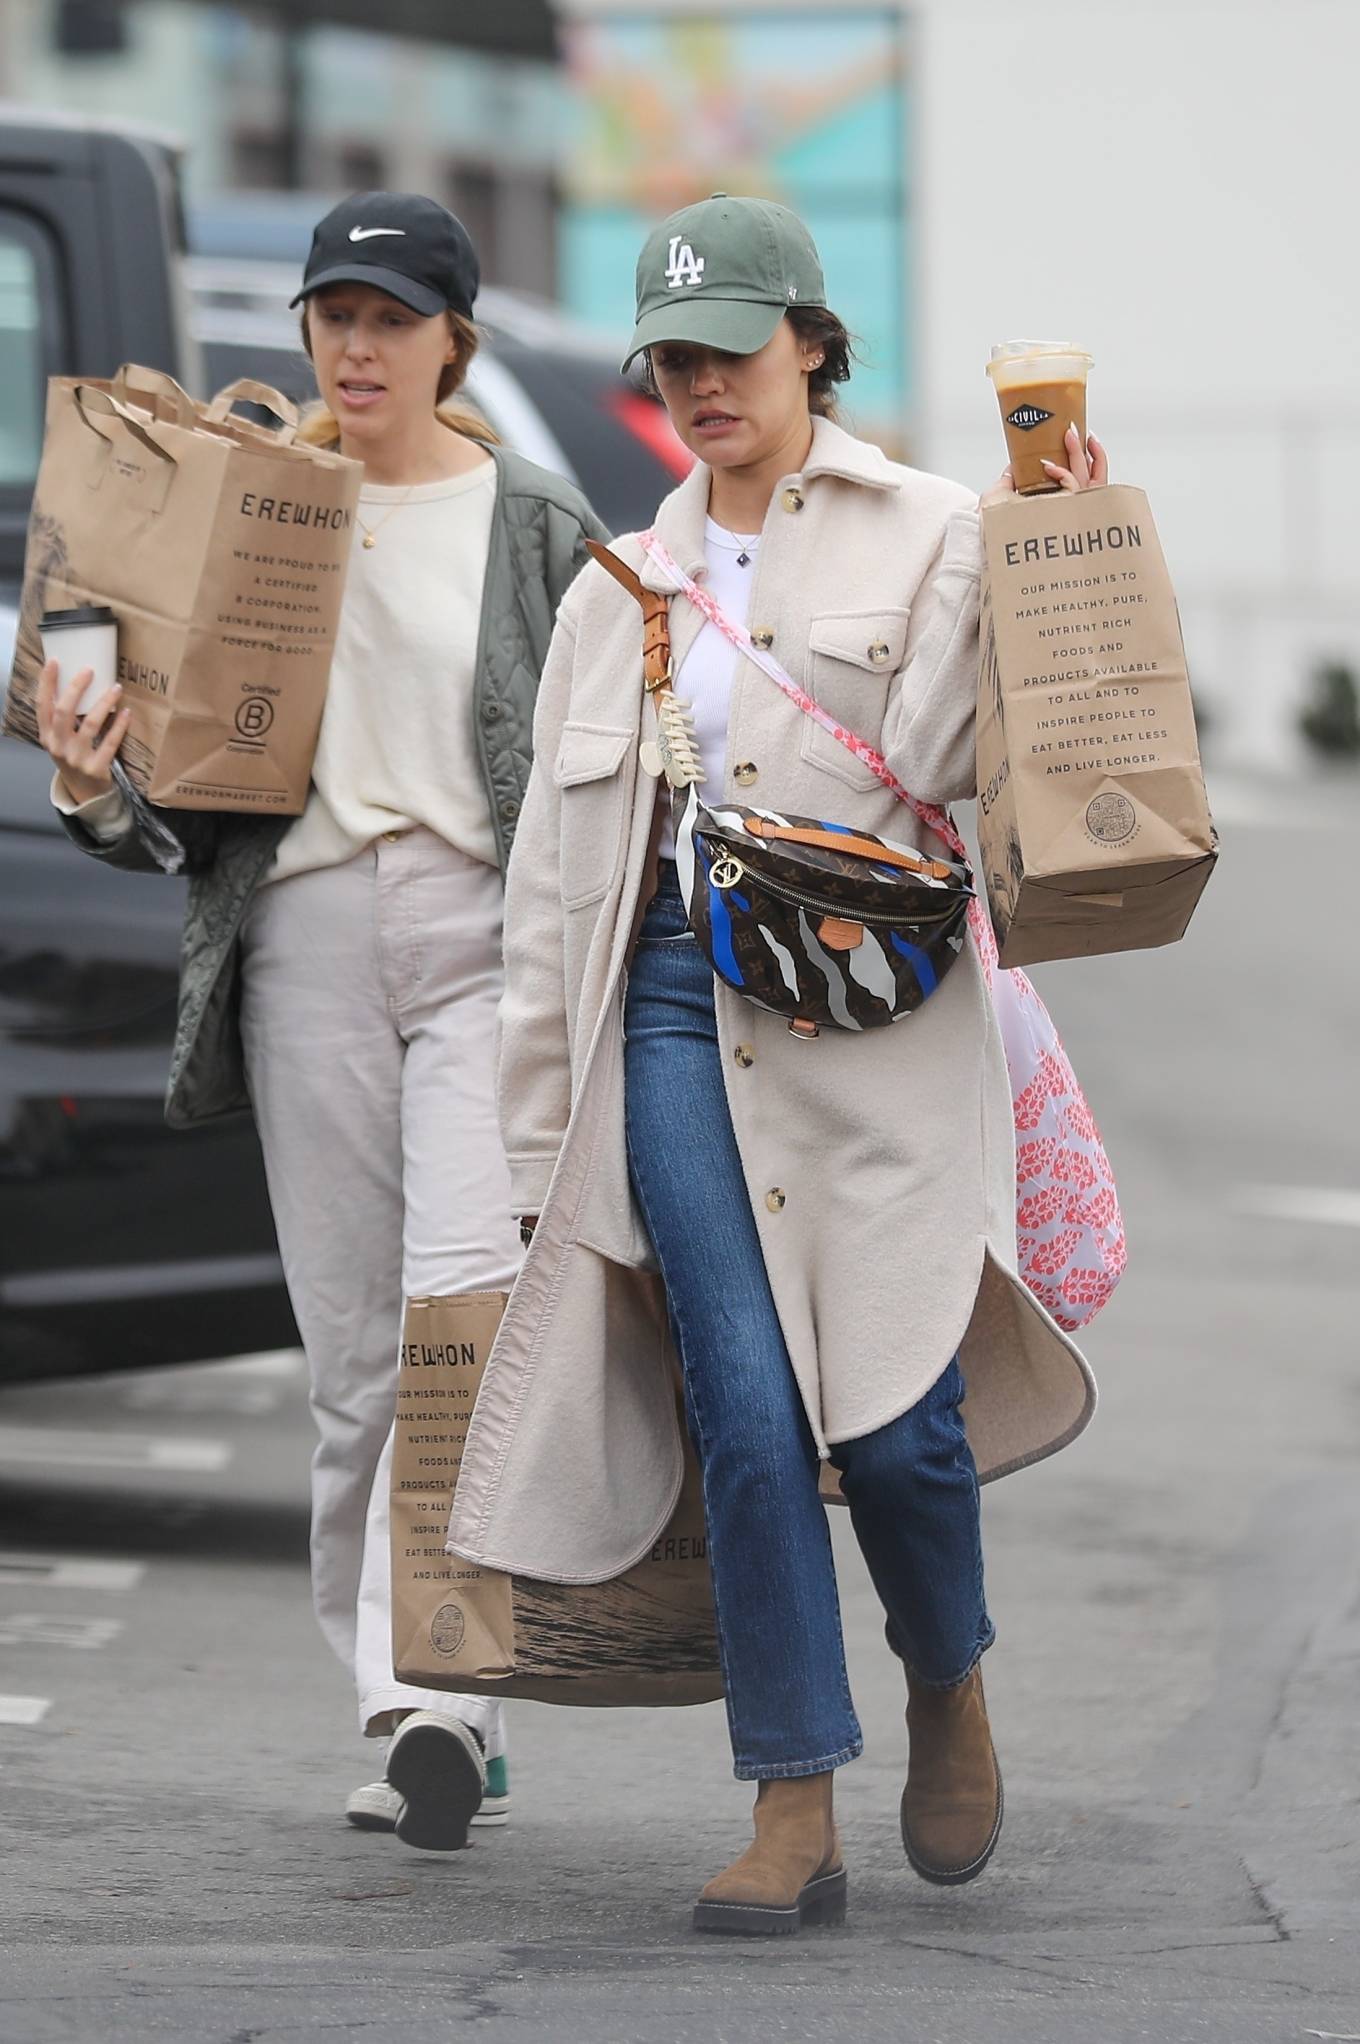 Lucy Hale 2022 : Lucy Hale – Shops for New Years Eve supplies at Erewhon in Studio City-01